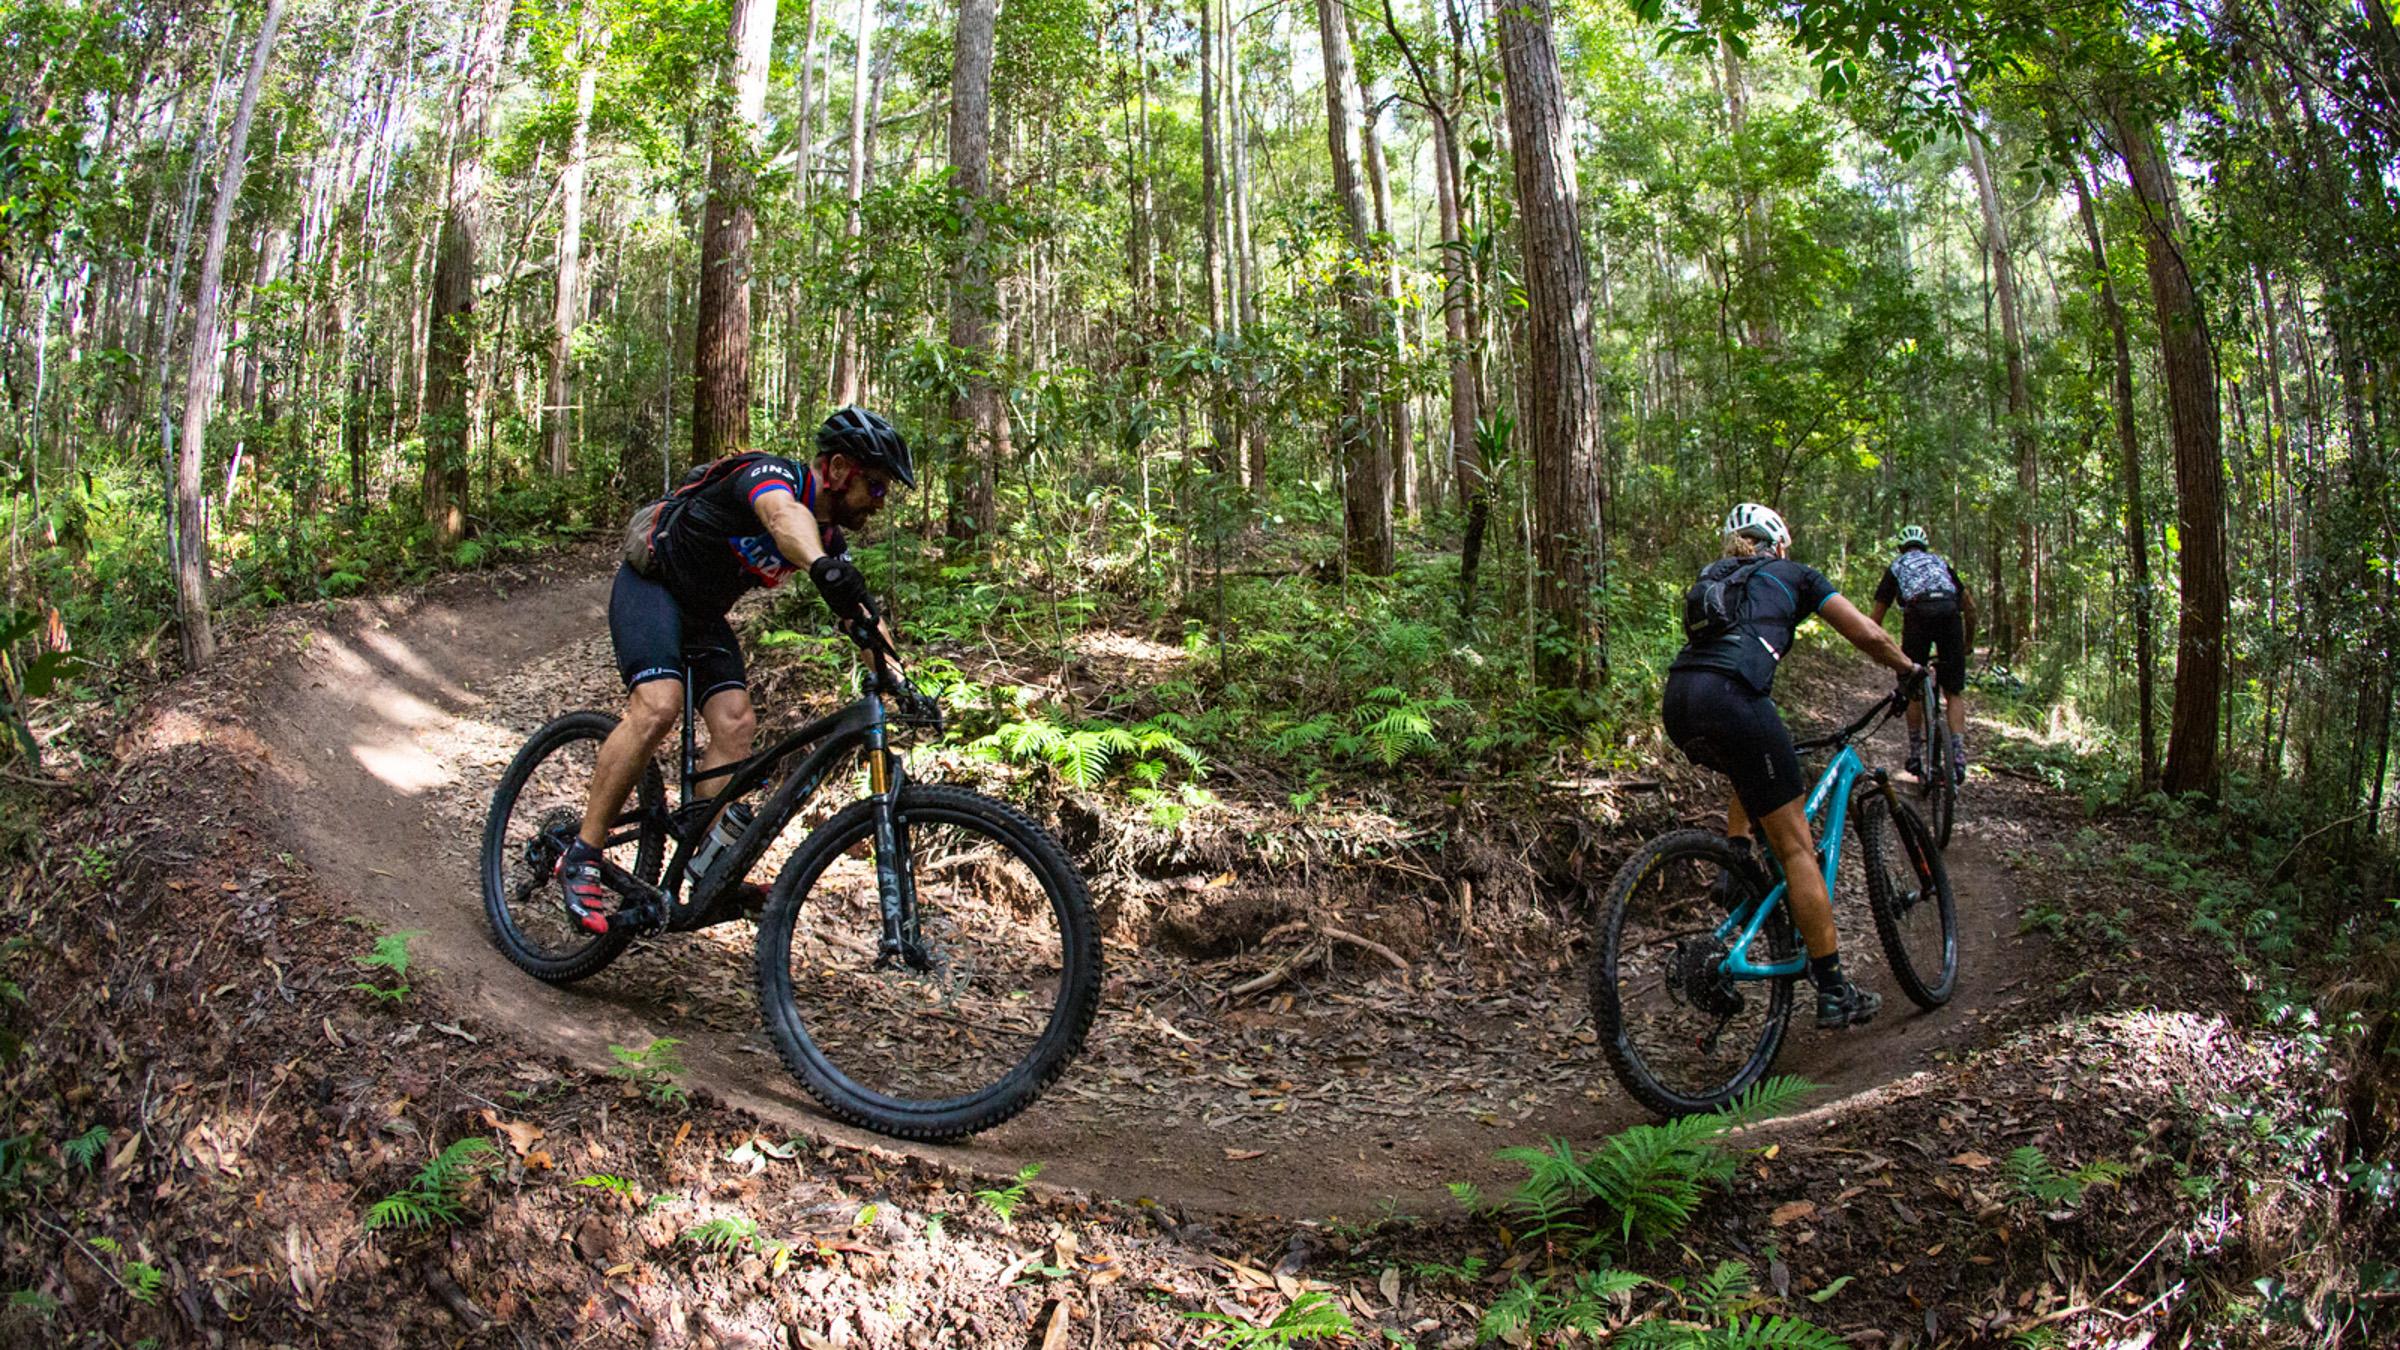 Three mountain bikers racing downhill on a dirt track through a Sunshine Coast forest